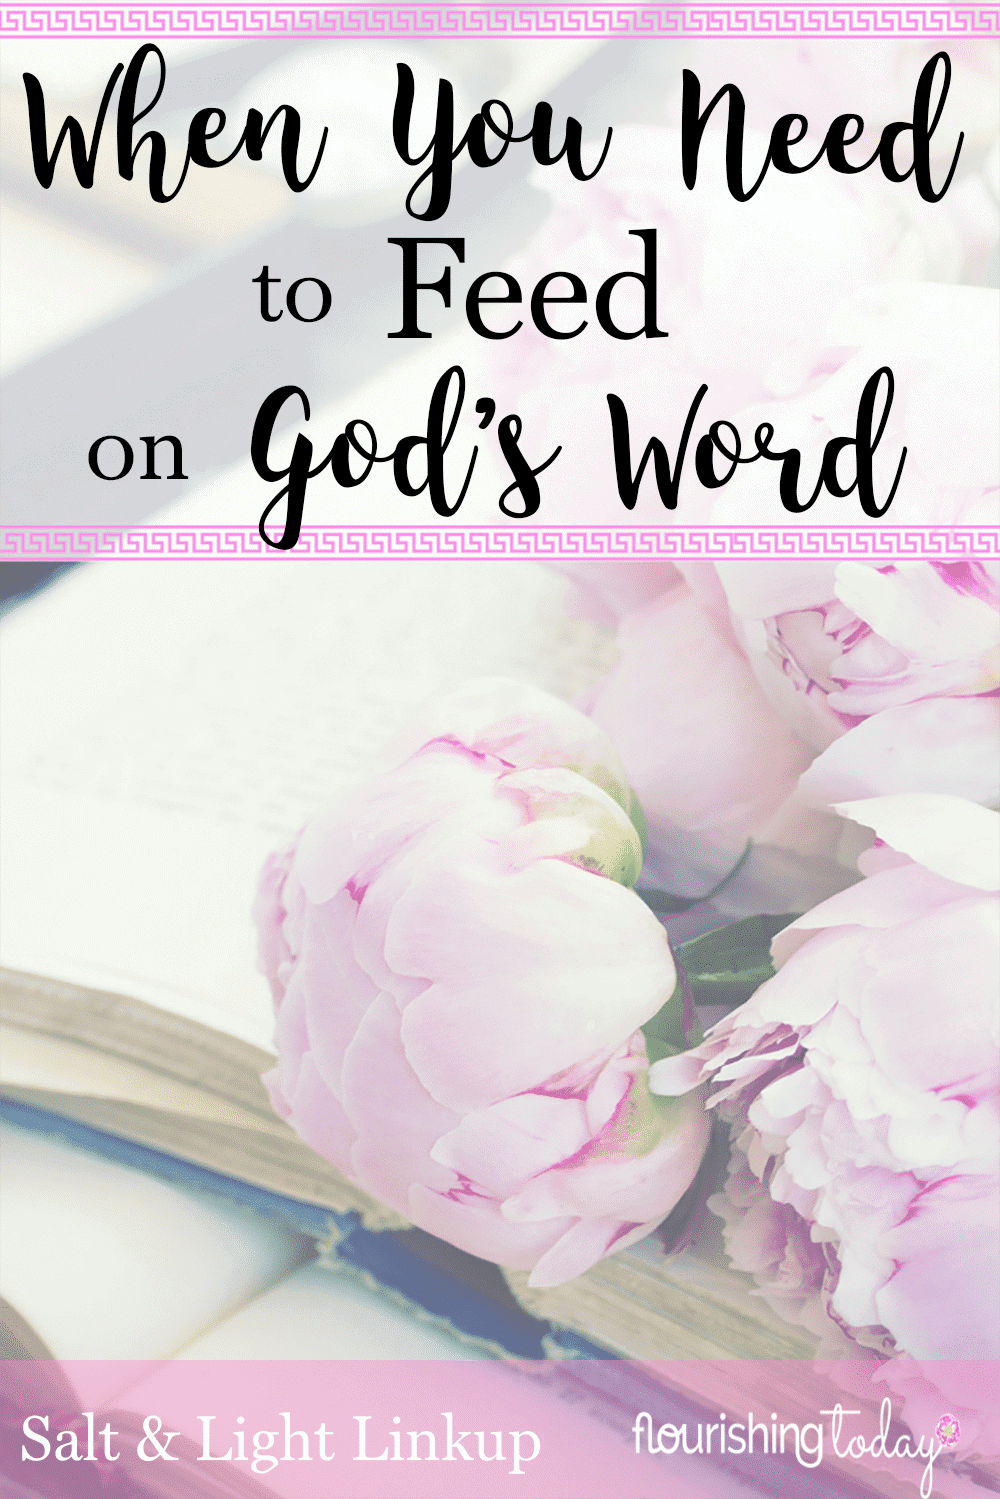 Do you find yourself craving God's Word? Sometimes we are become spiritually dry and need to feed on God's Word. Here are great tips for feeding on the Word